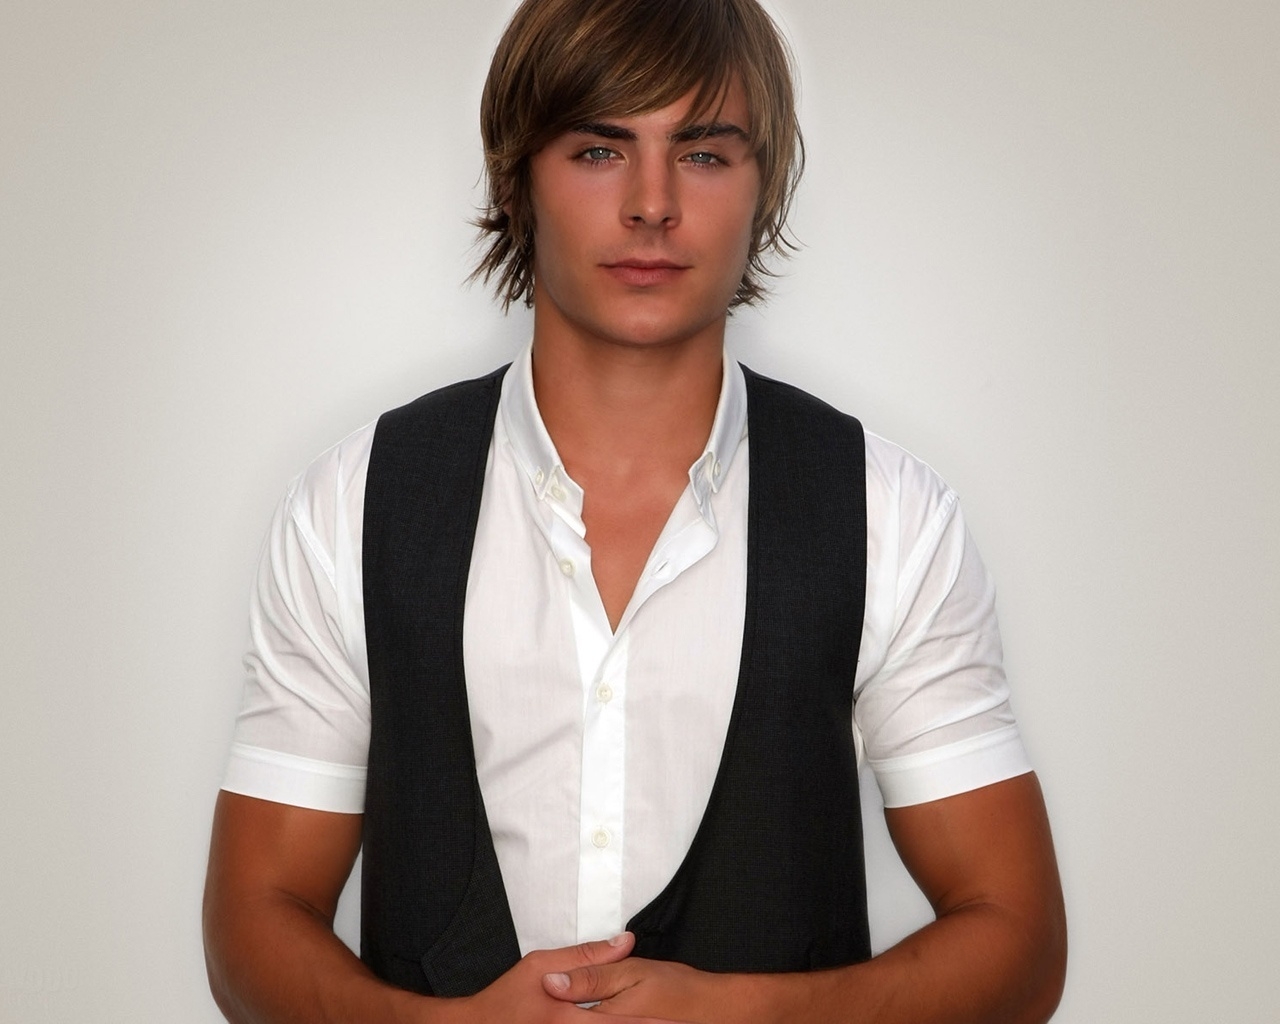 Efron Zac for 1280 x 1024 resolution